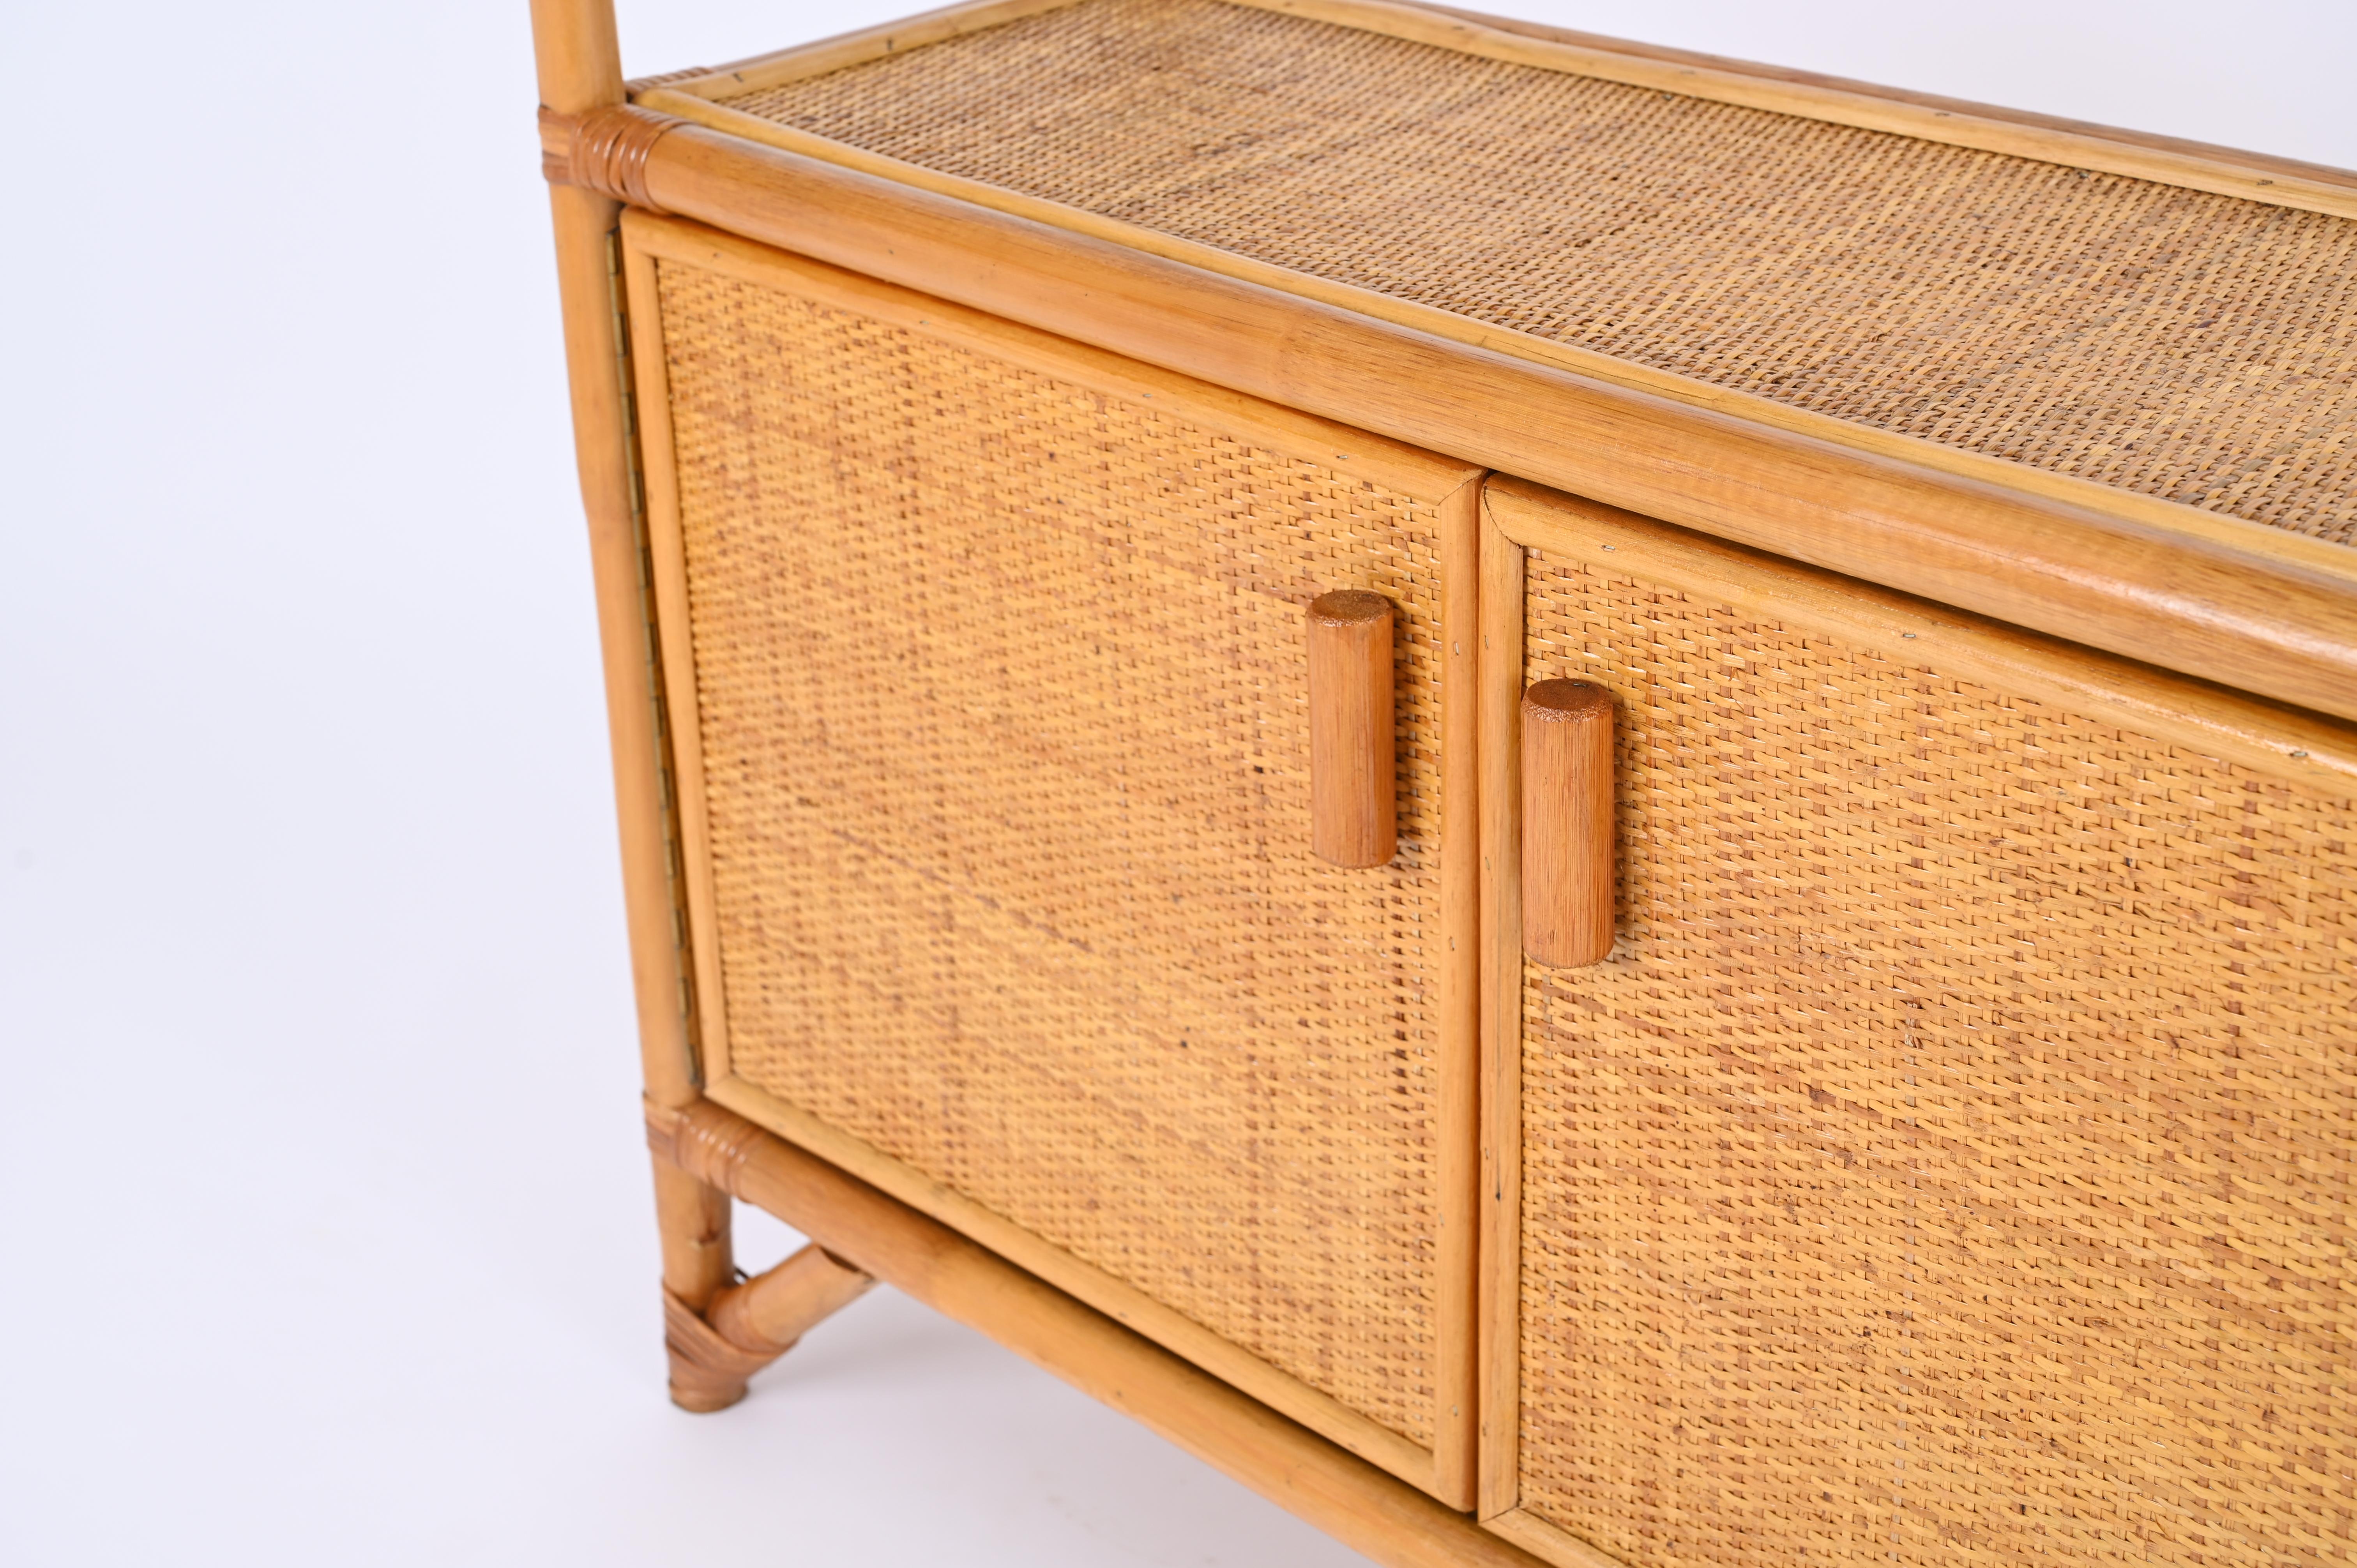 Midcentury Italian Modern Rattan and Bamboo Bookcase with Doors, 1970s For Sale 6